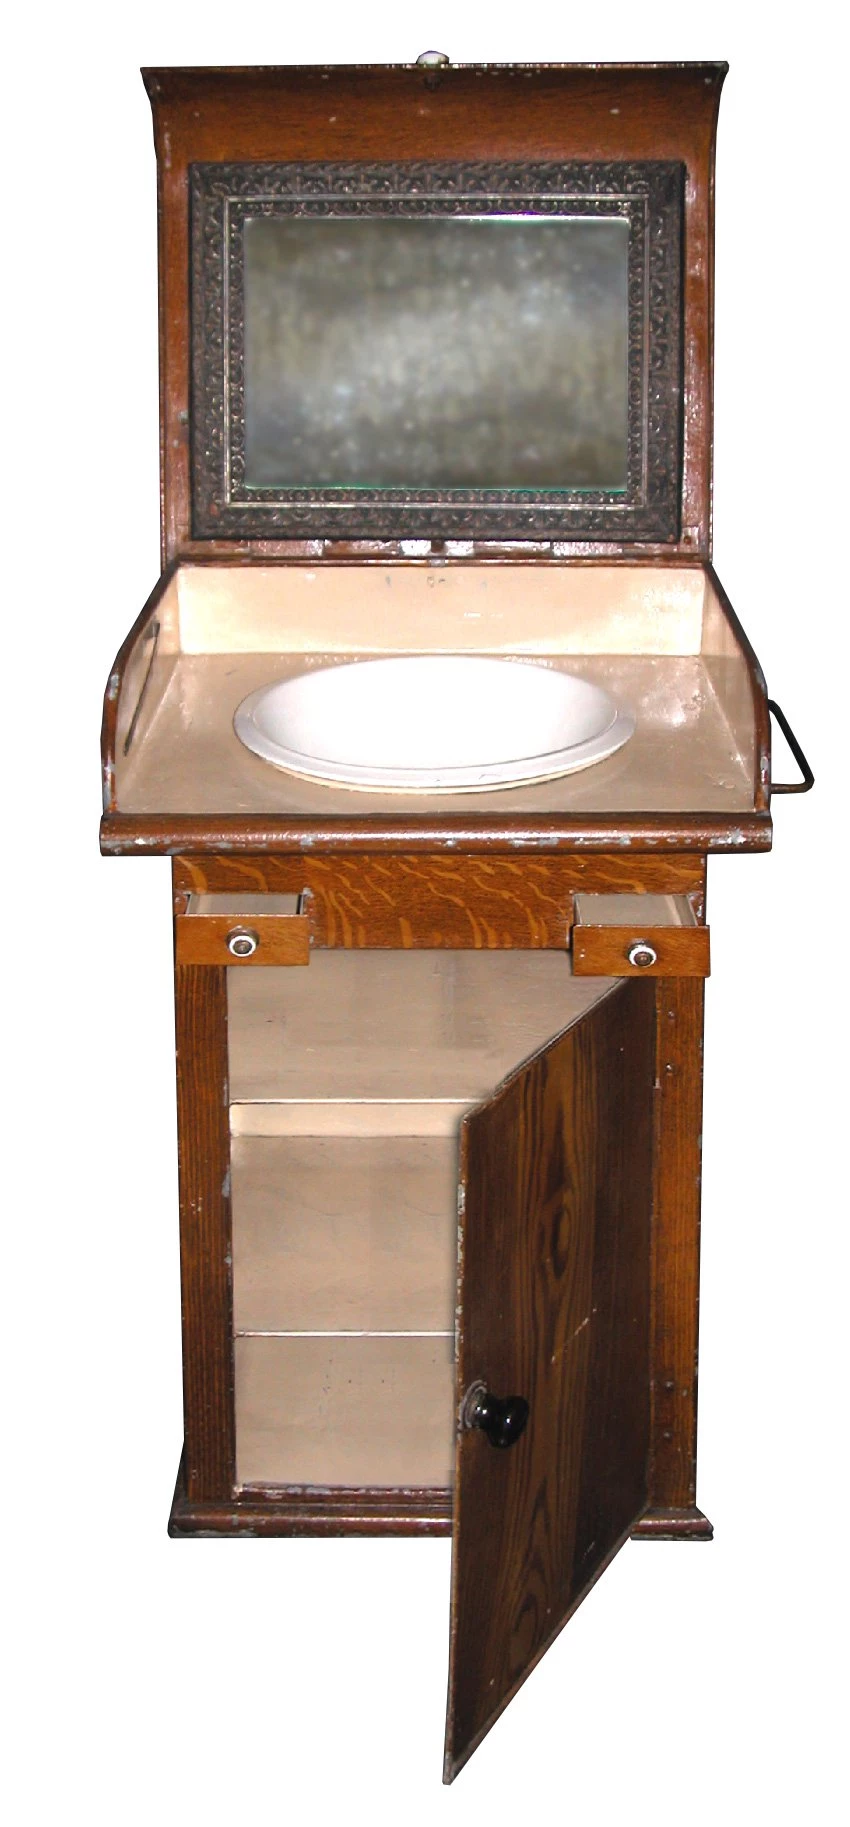 Photo of a bathroom vanity made of tin, but painted to look like wood.